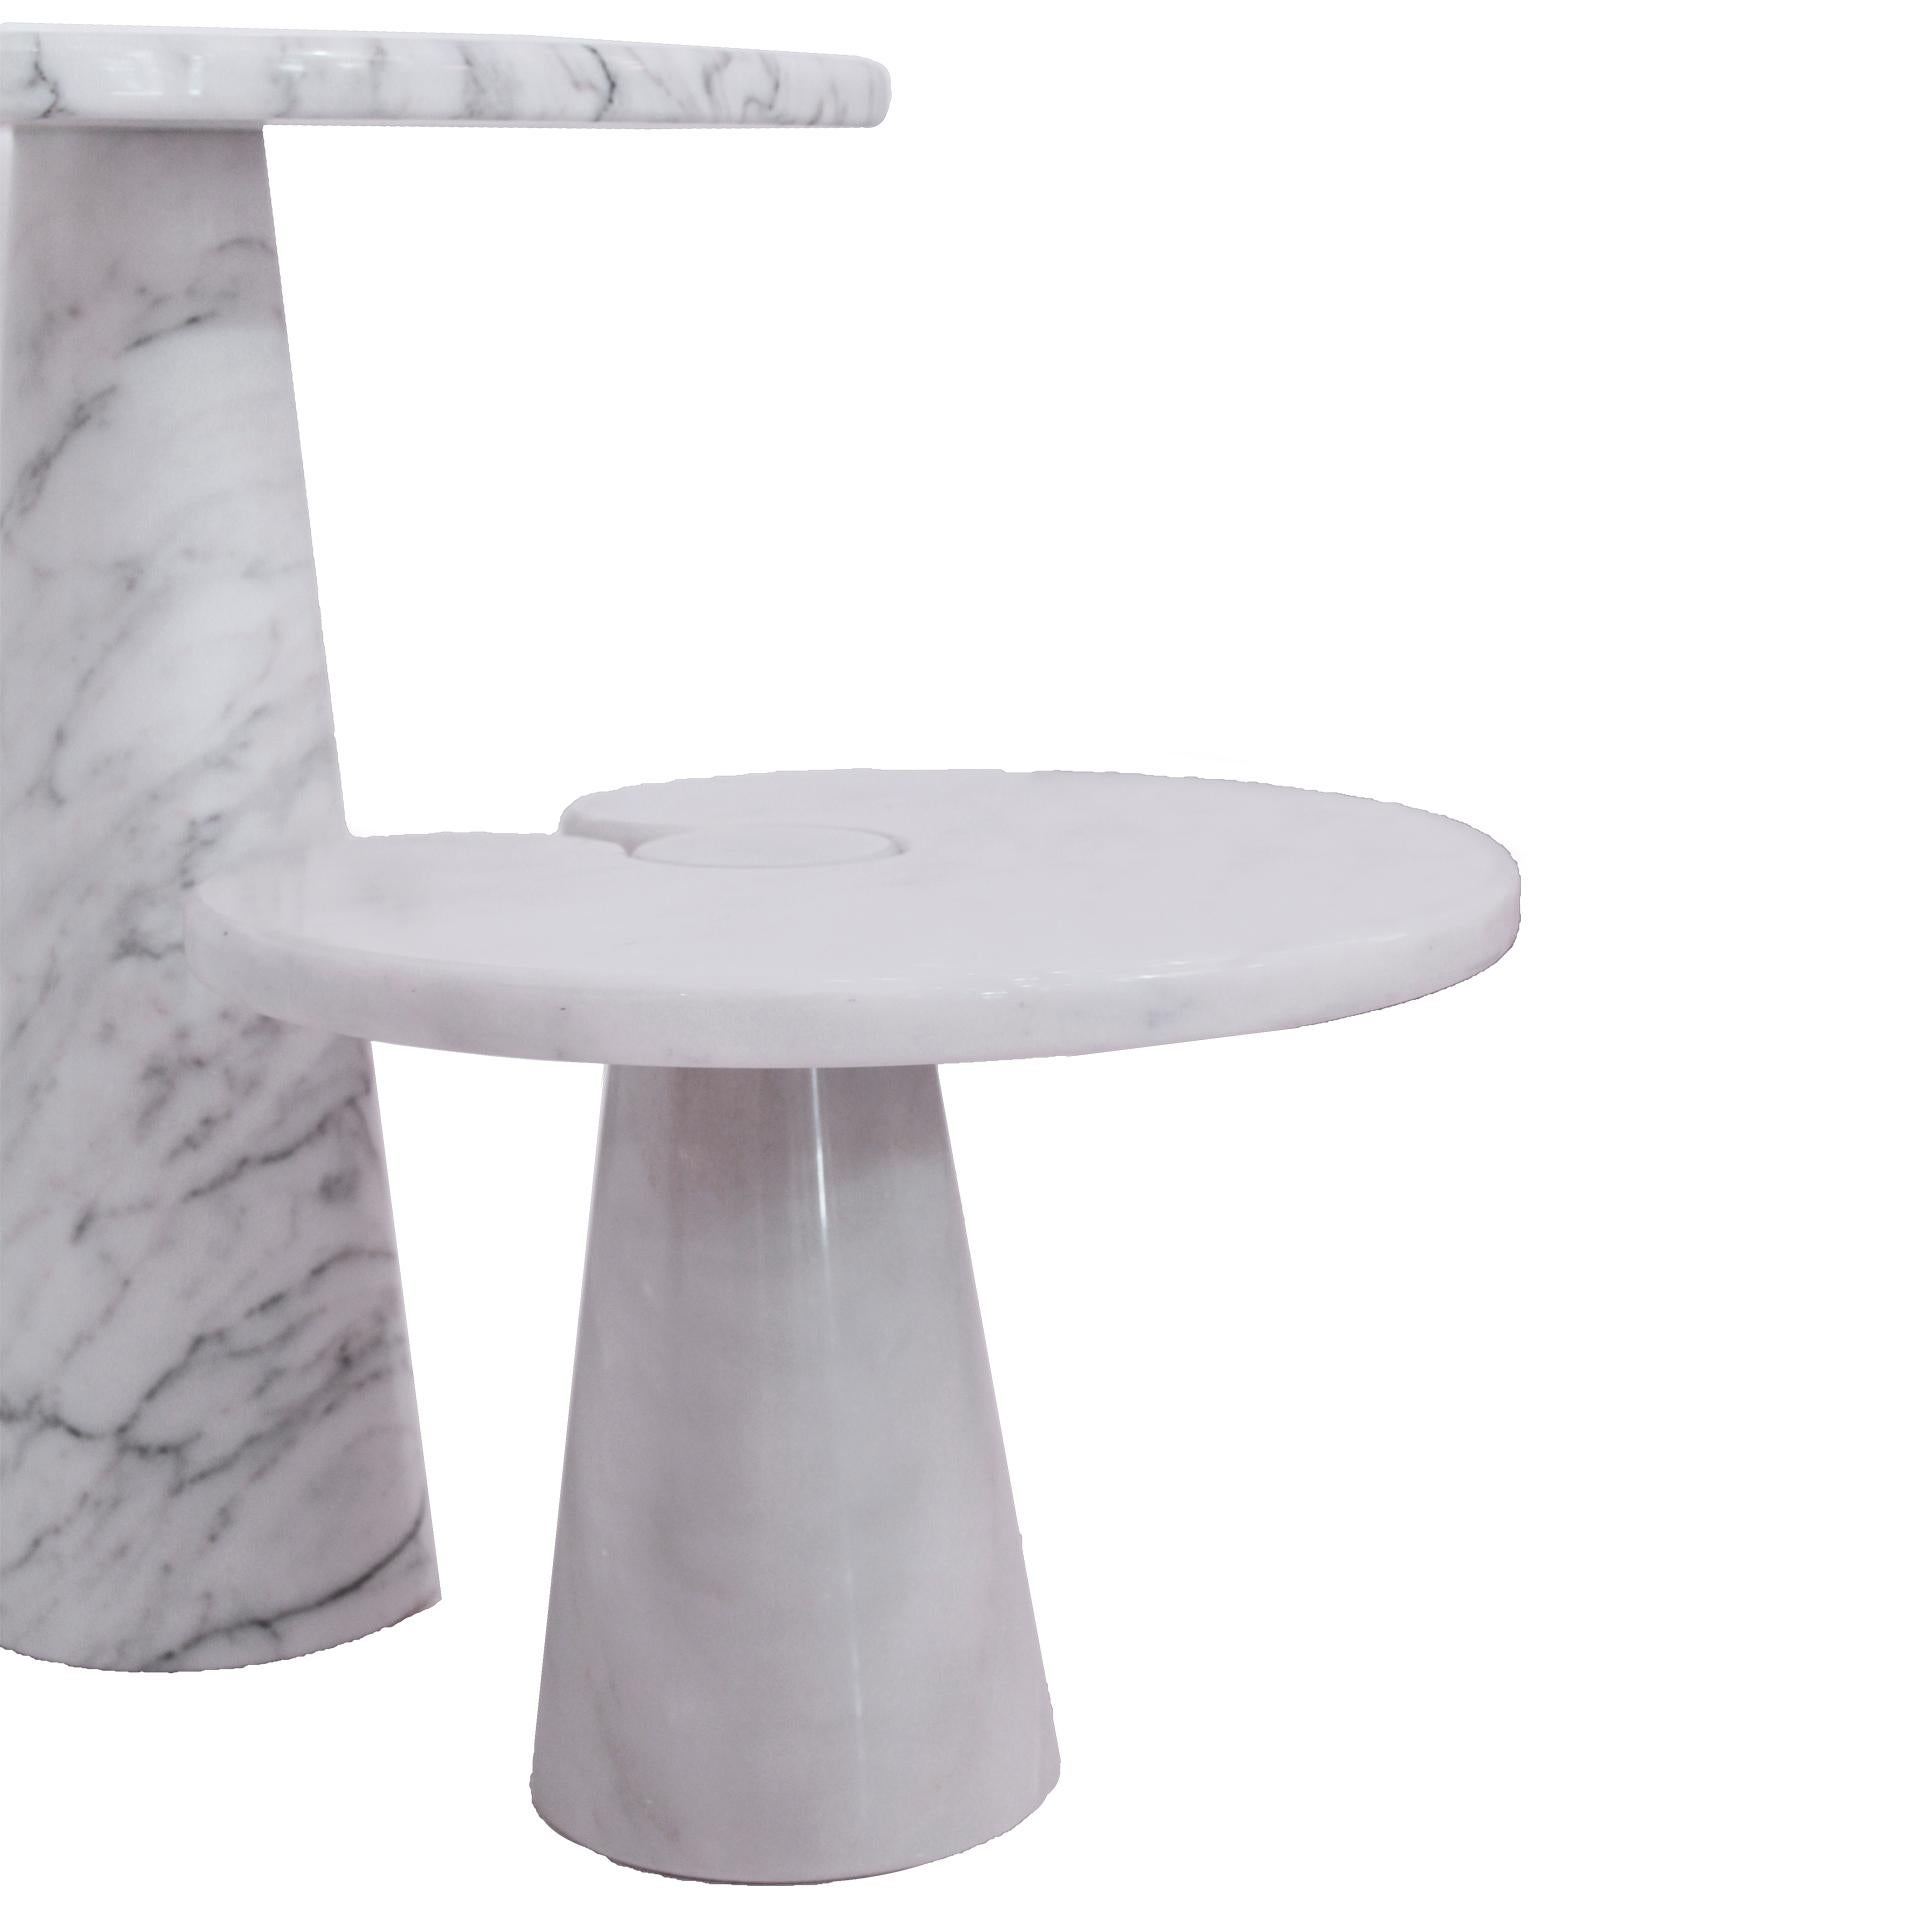 Pair of Arabescato marble side tables designed by Angelo Mangiarotti. The tables belong to the 